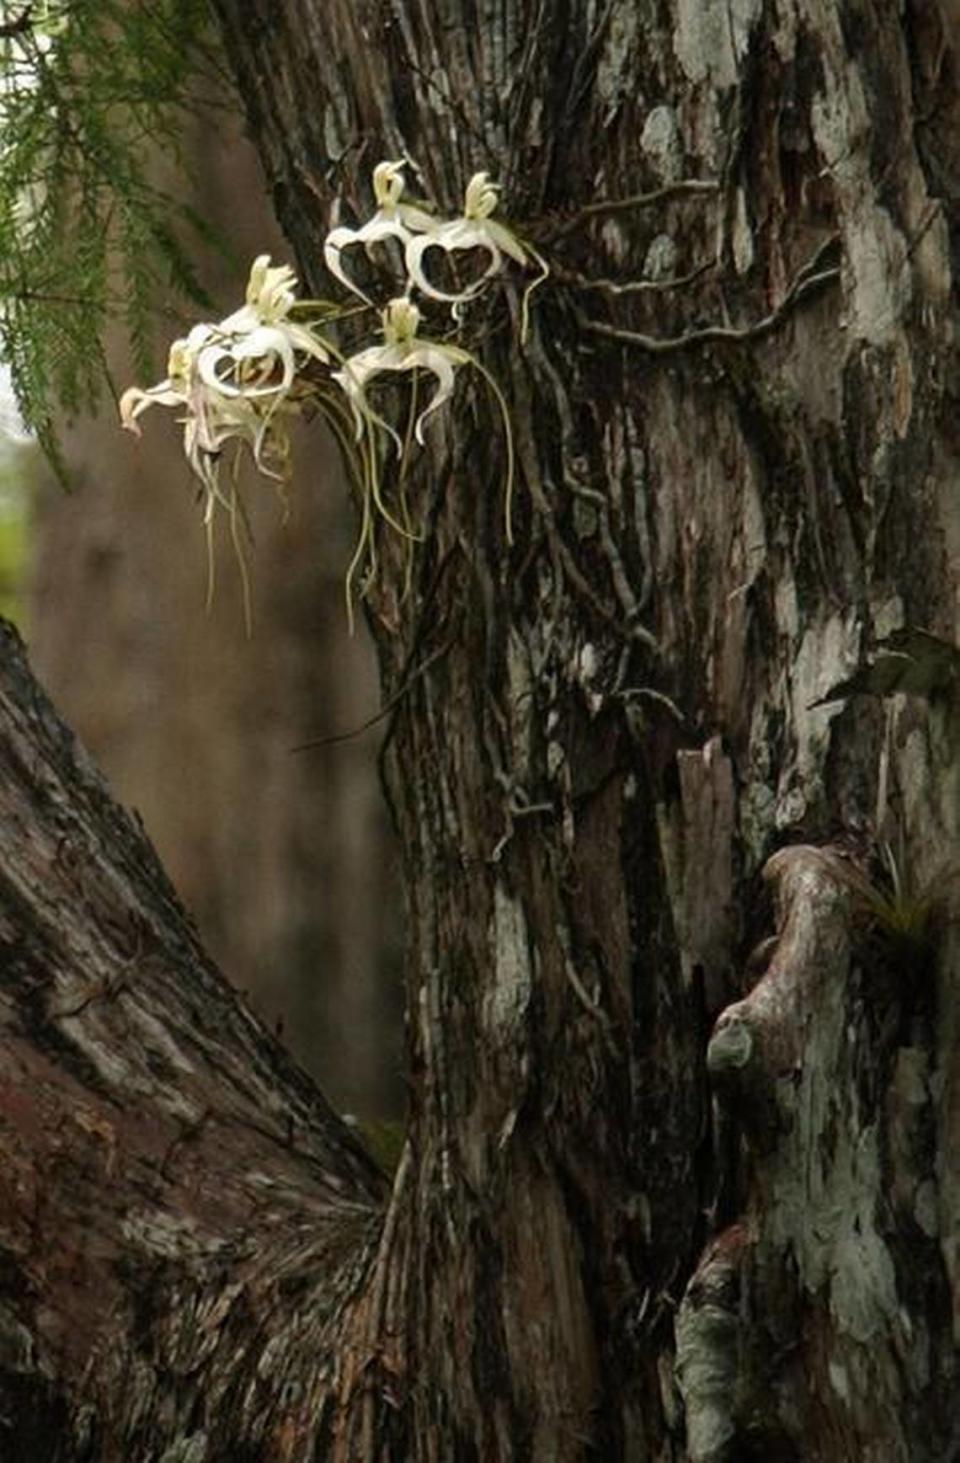 A rare ghost orchid (Polyrrhiza lindenii) grows in an old cypress tree at the Corkscrew Swamp Sanctuary in Naples, Fla.